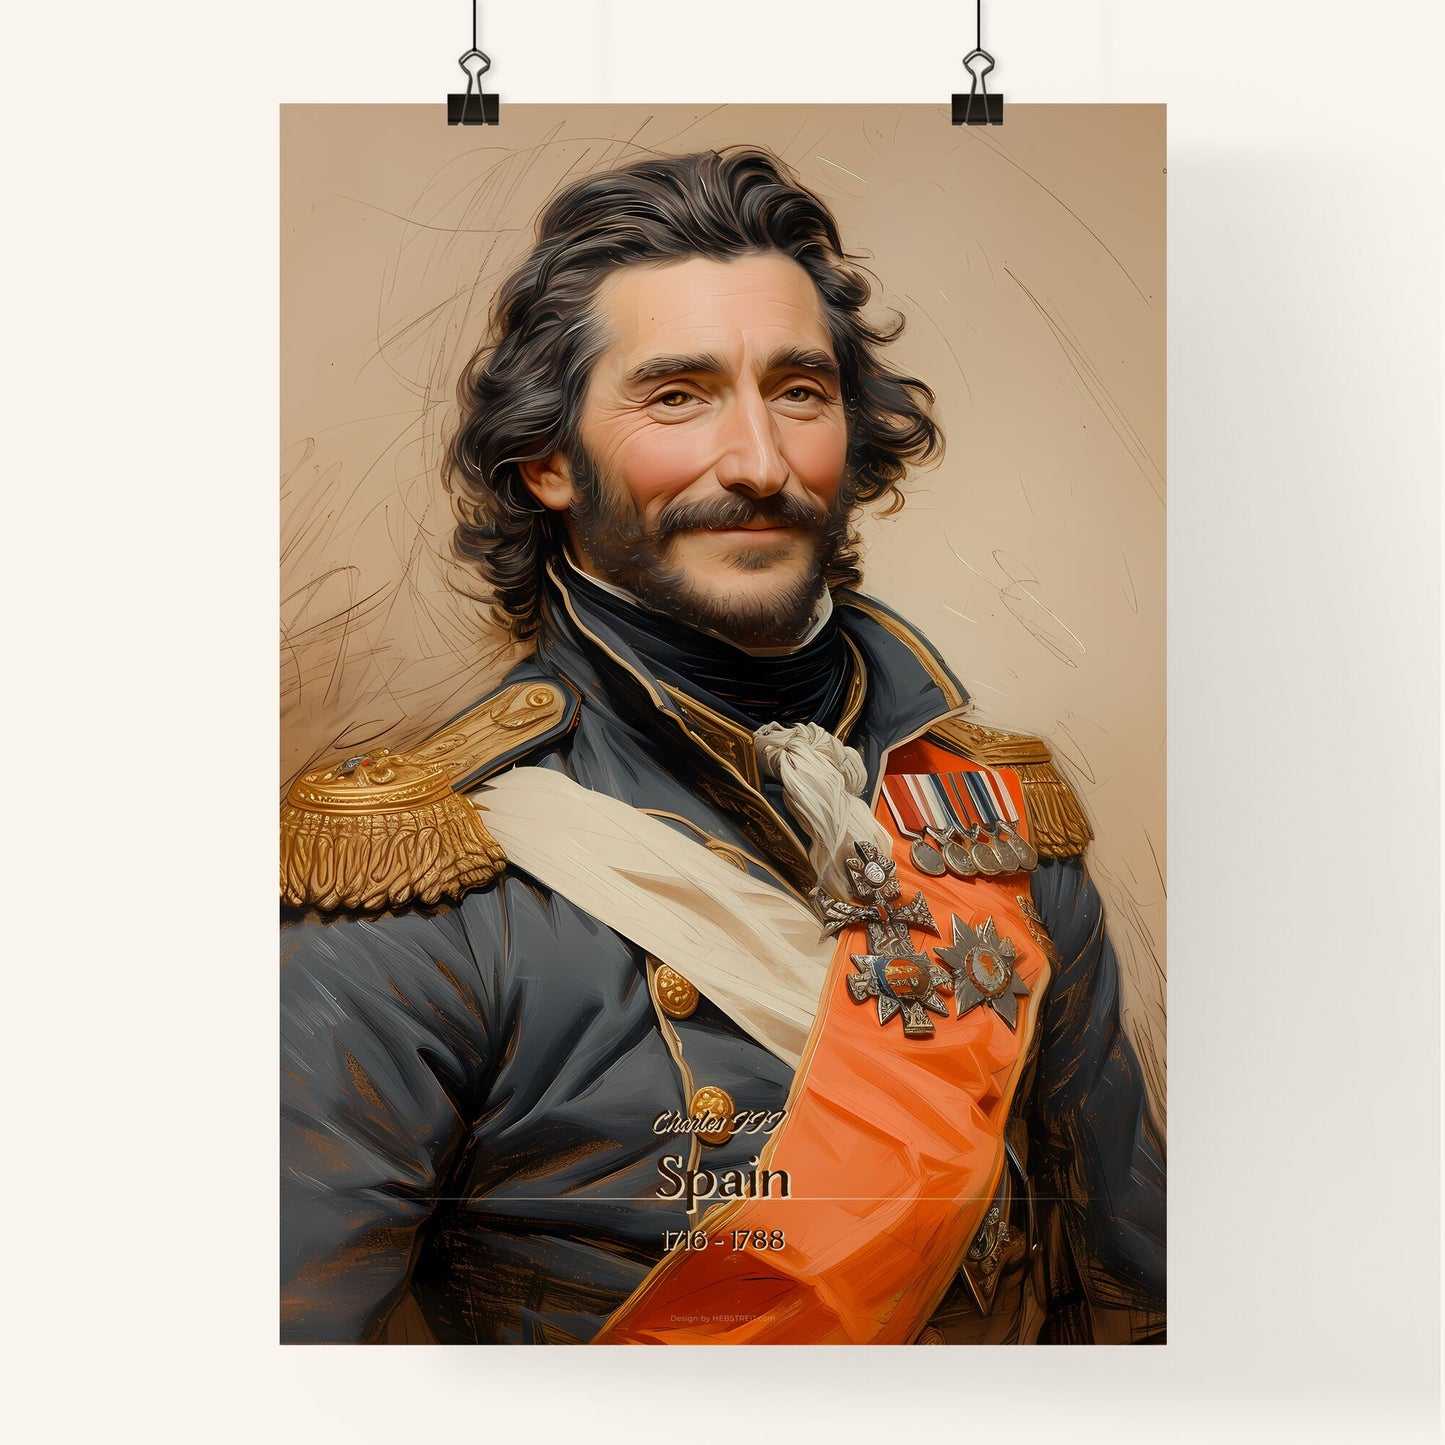 Charles III, Spain, 1716 - 1788, A Poster of a man in a military uniform Default Title